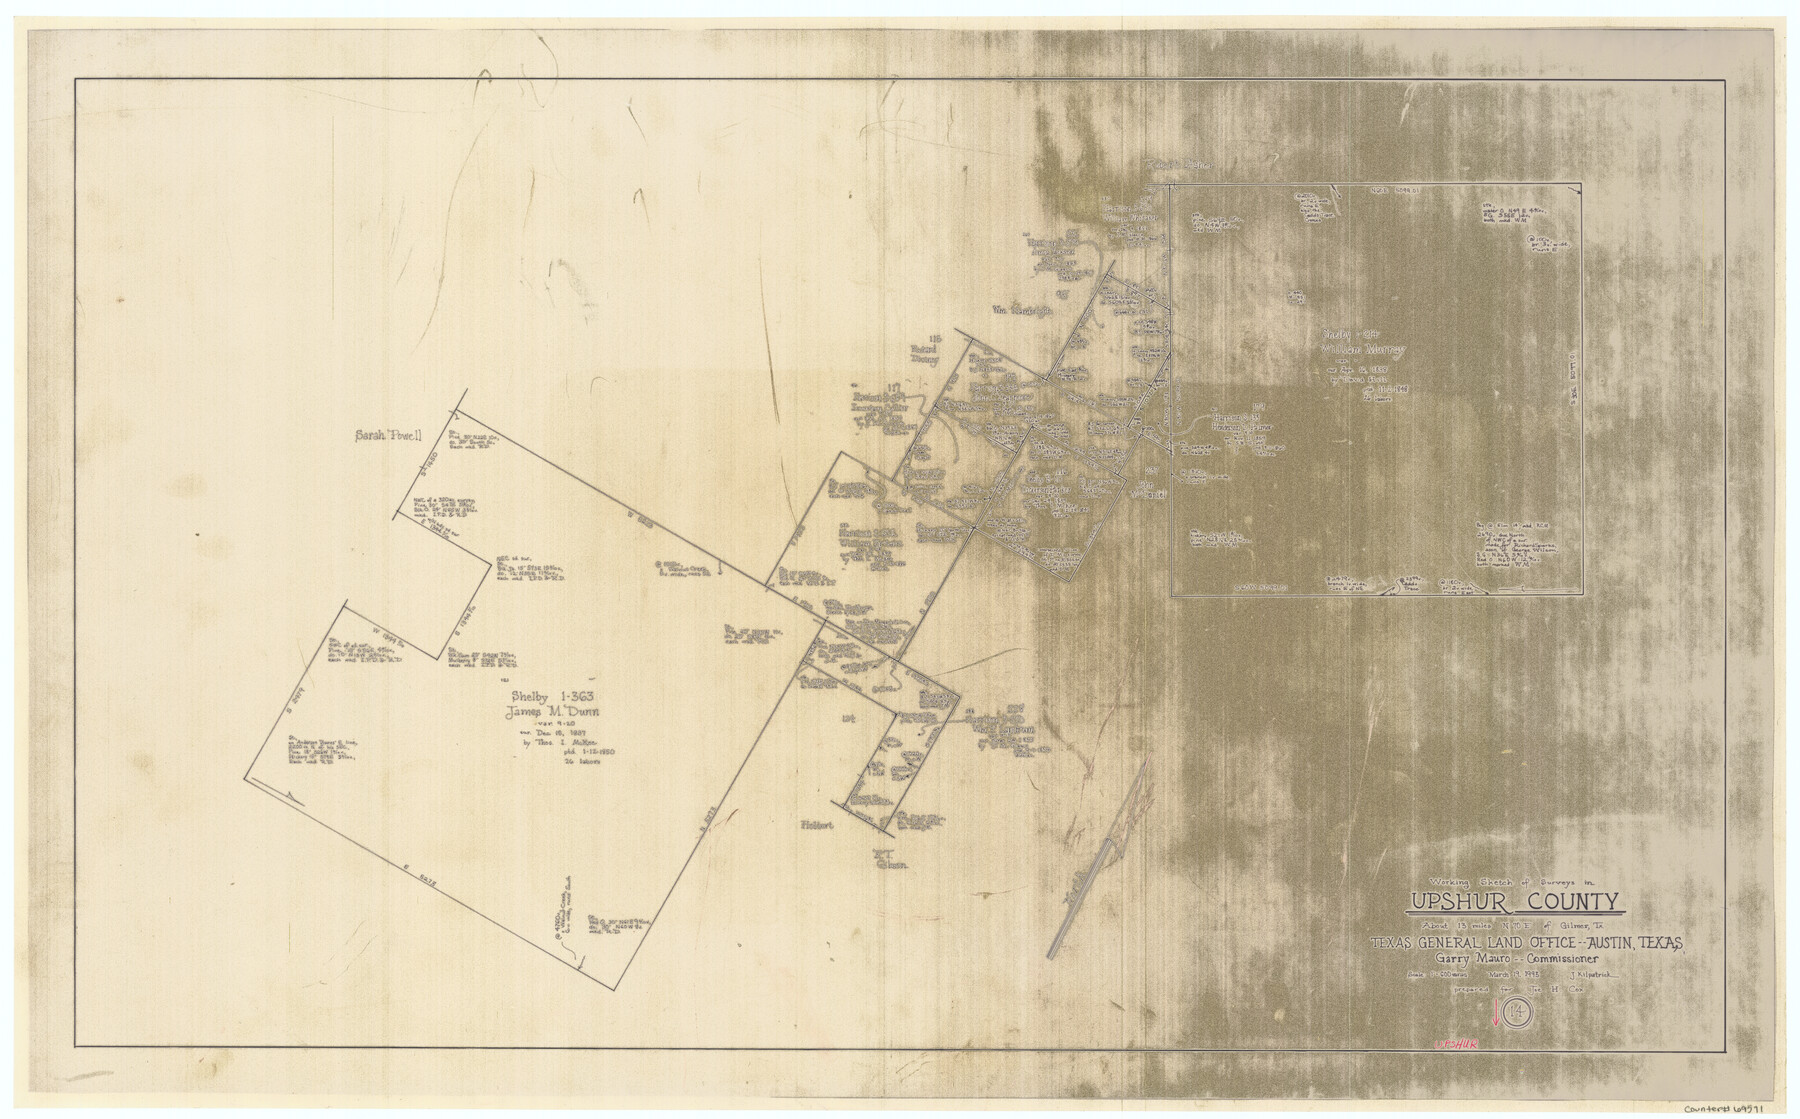 69571, Upshur County Working Sketch 14, General Map Collection